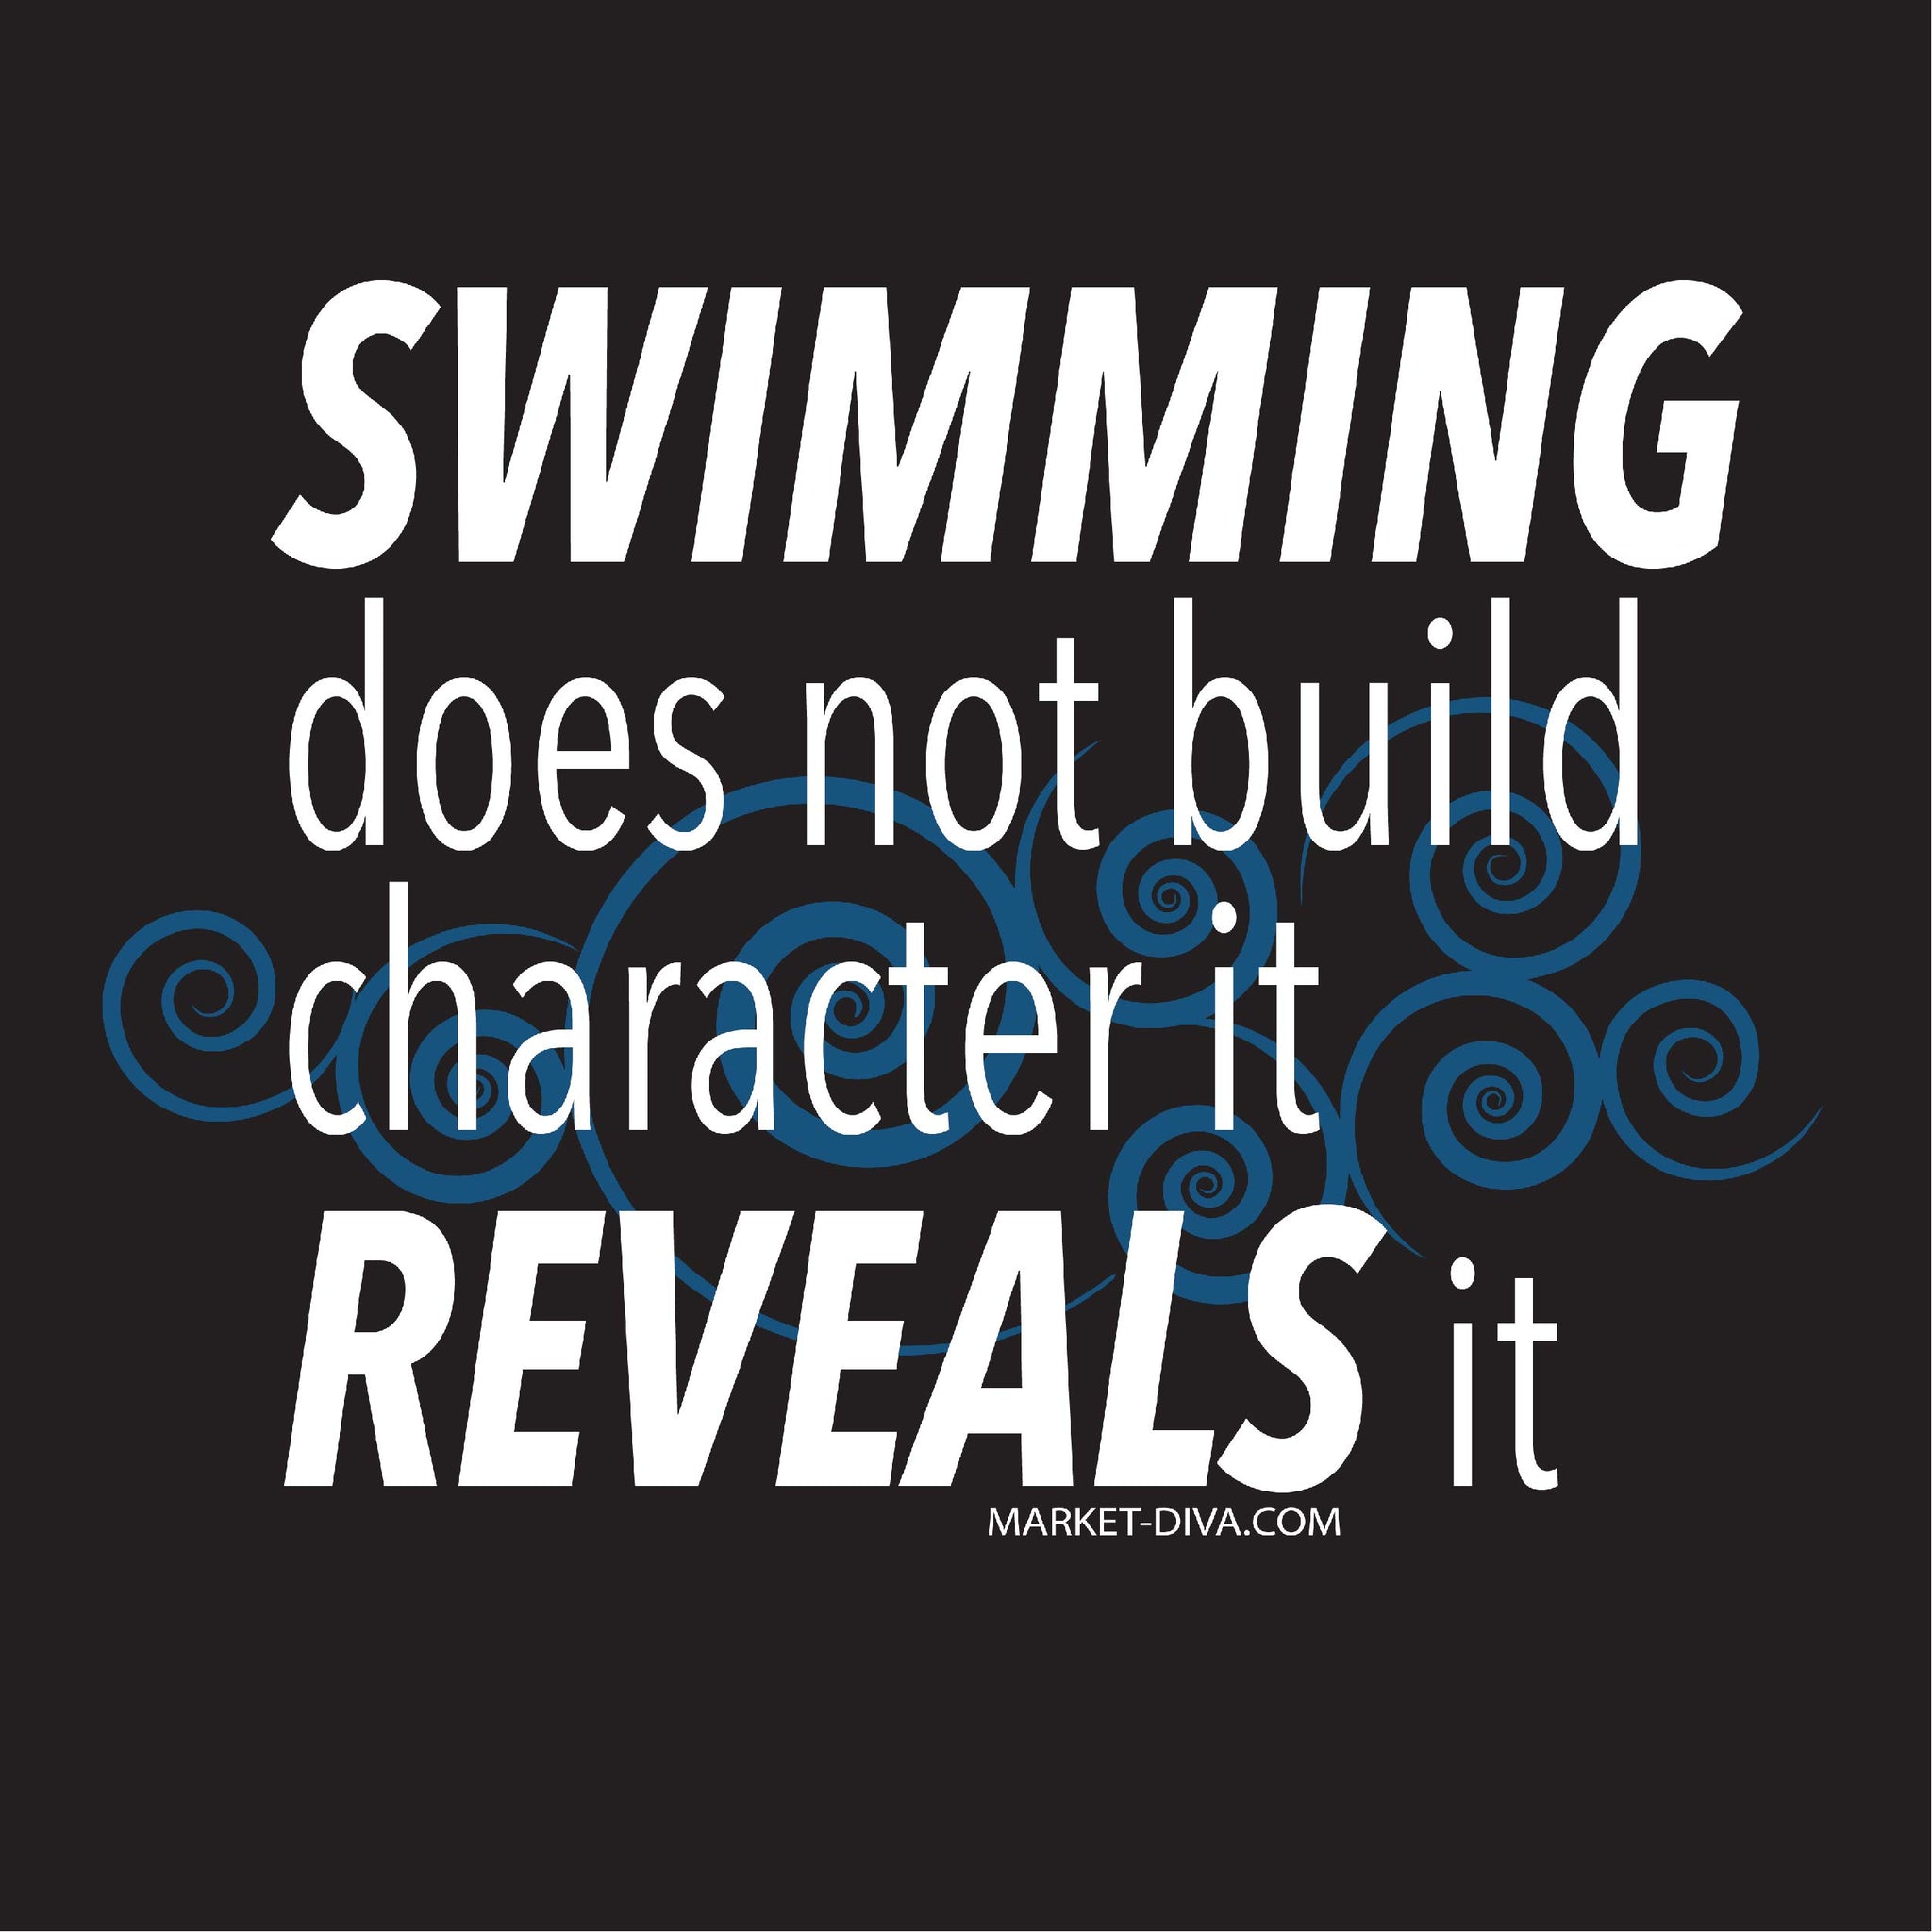 Swimming does not build character, it reveals it